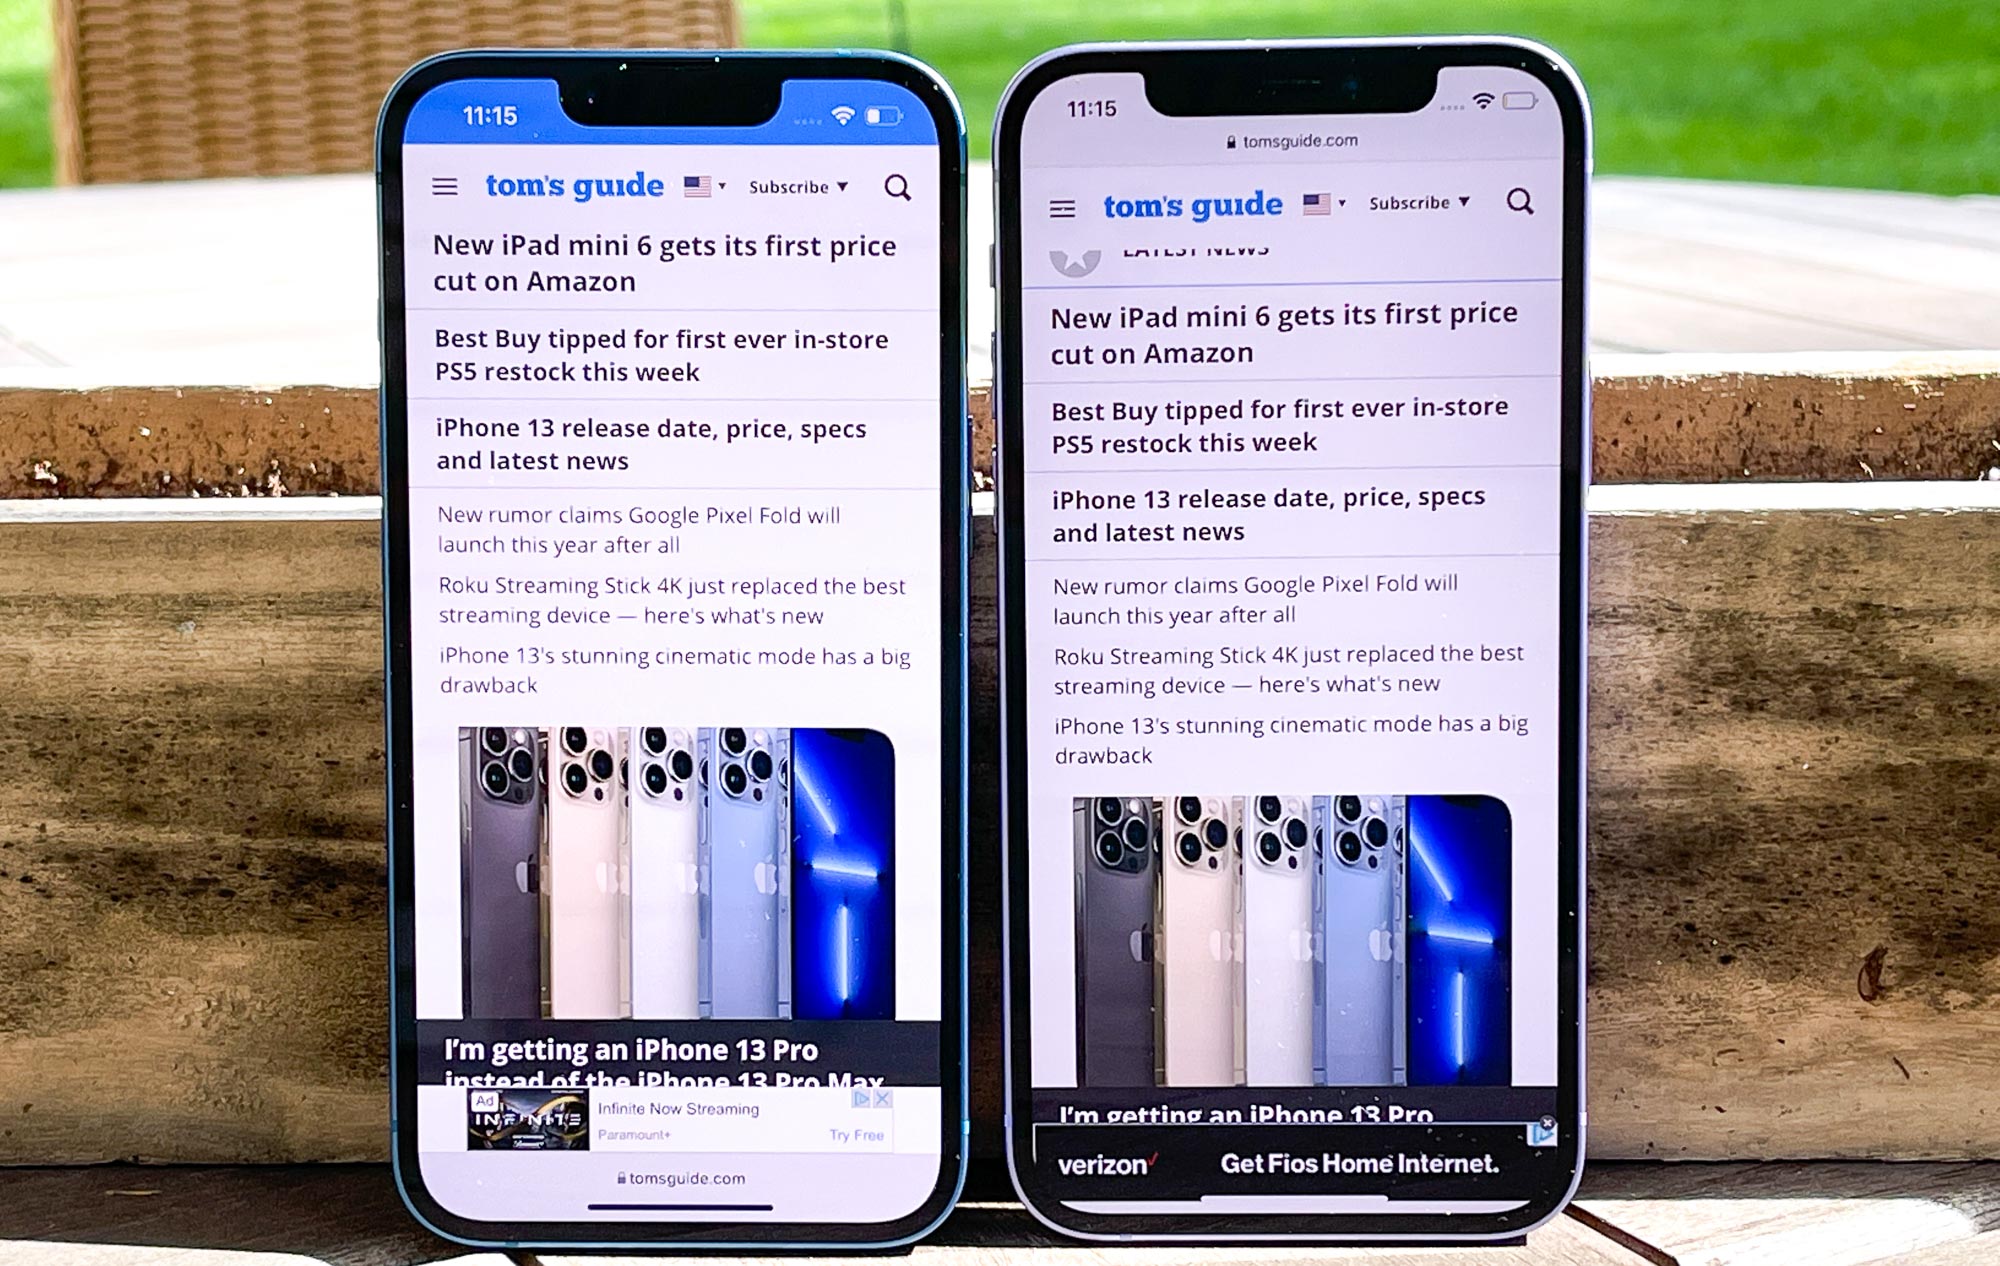 iPhone 13 (left) and iPhone 12 Pro (right)